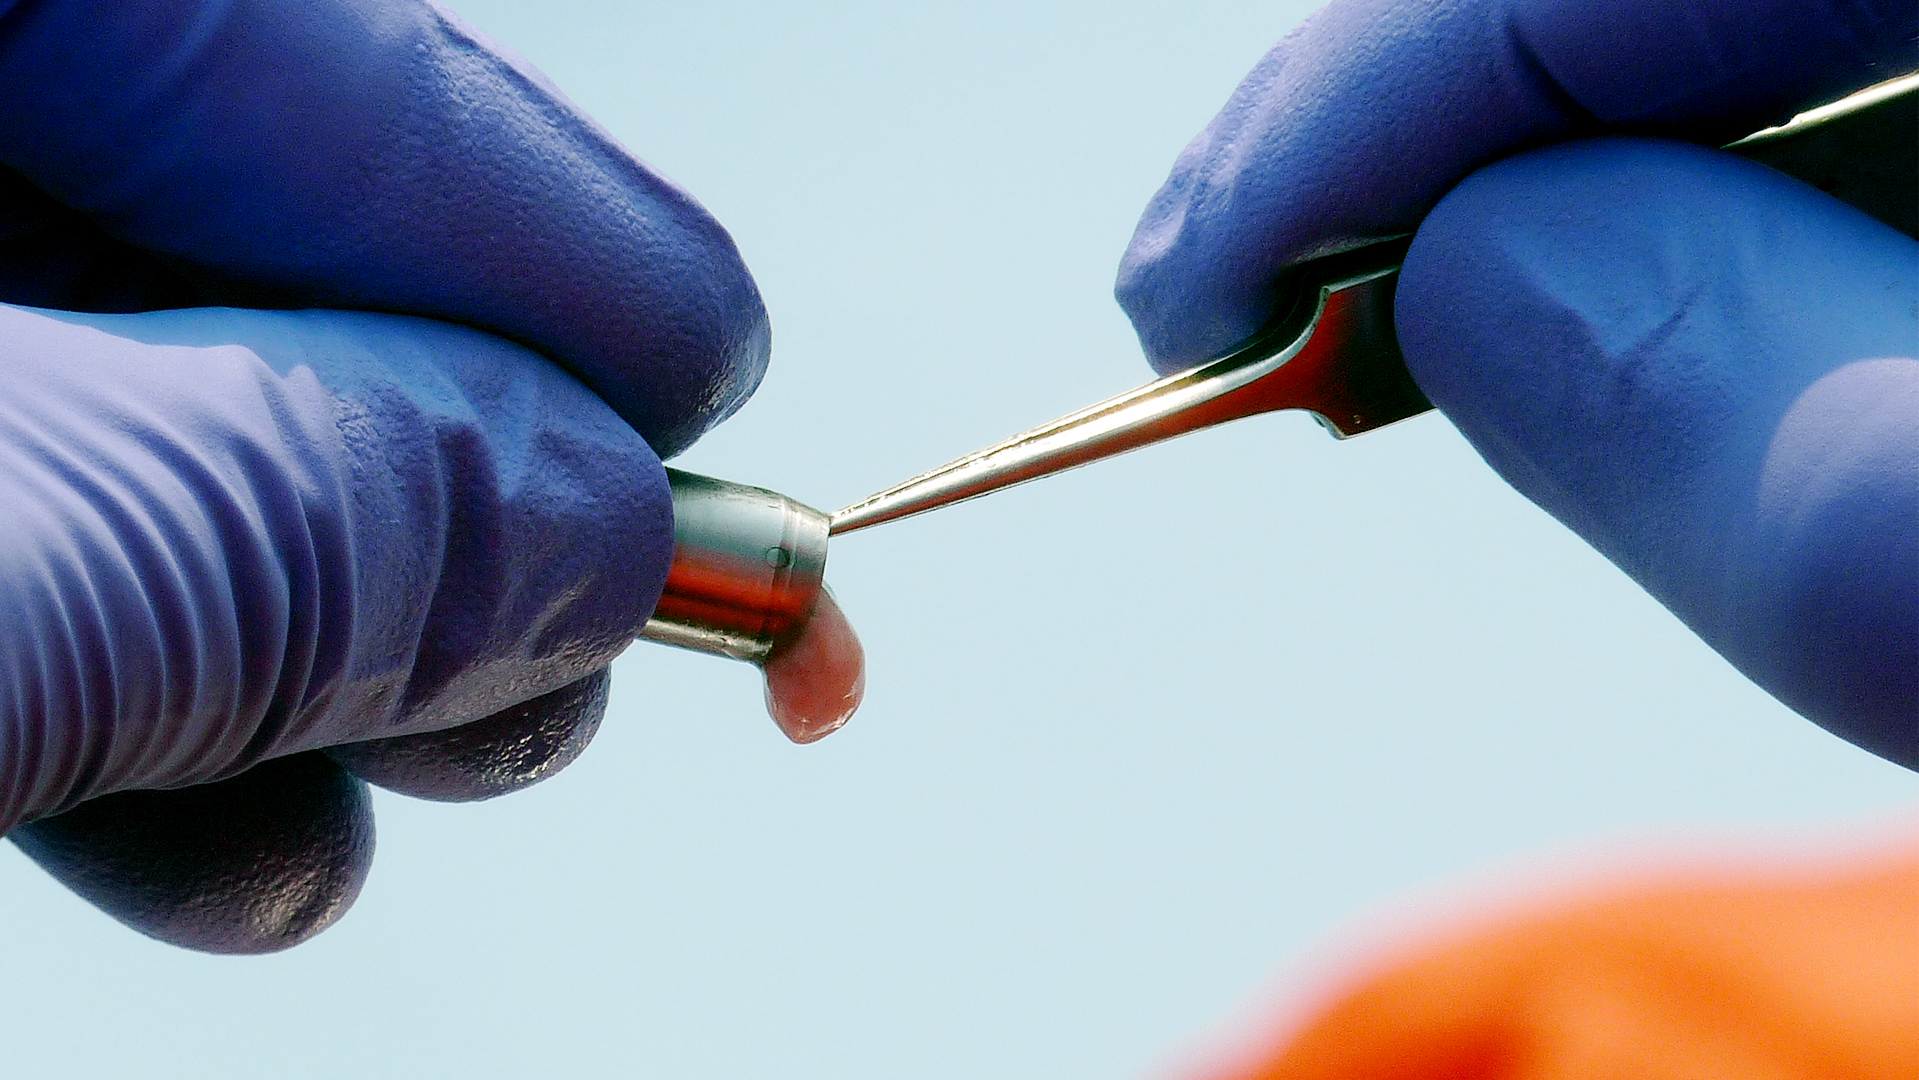 Close-up view of the fingers of a researcher removing the fat and skin sample from a dart using a pair of forceps.